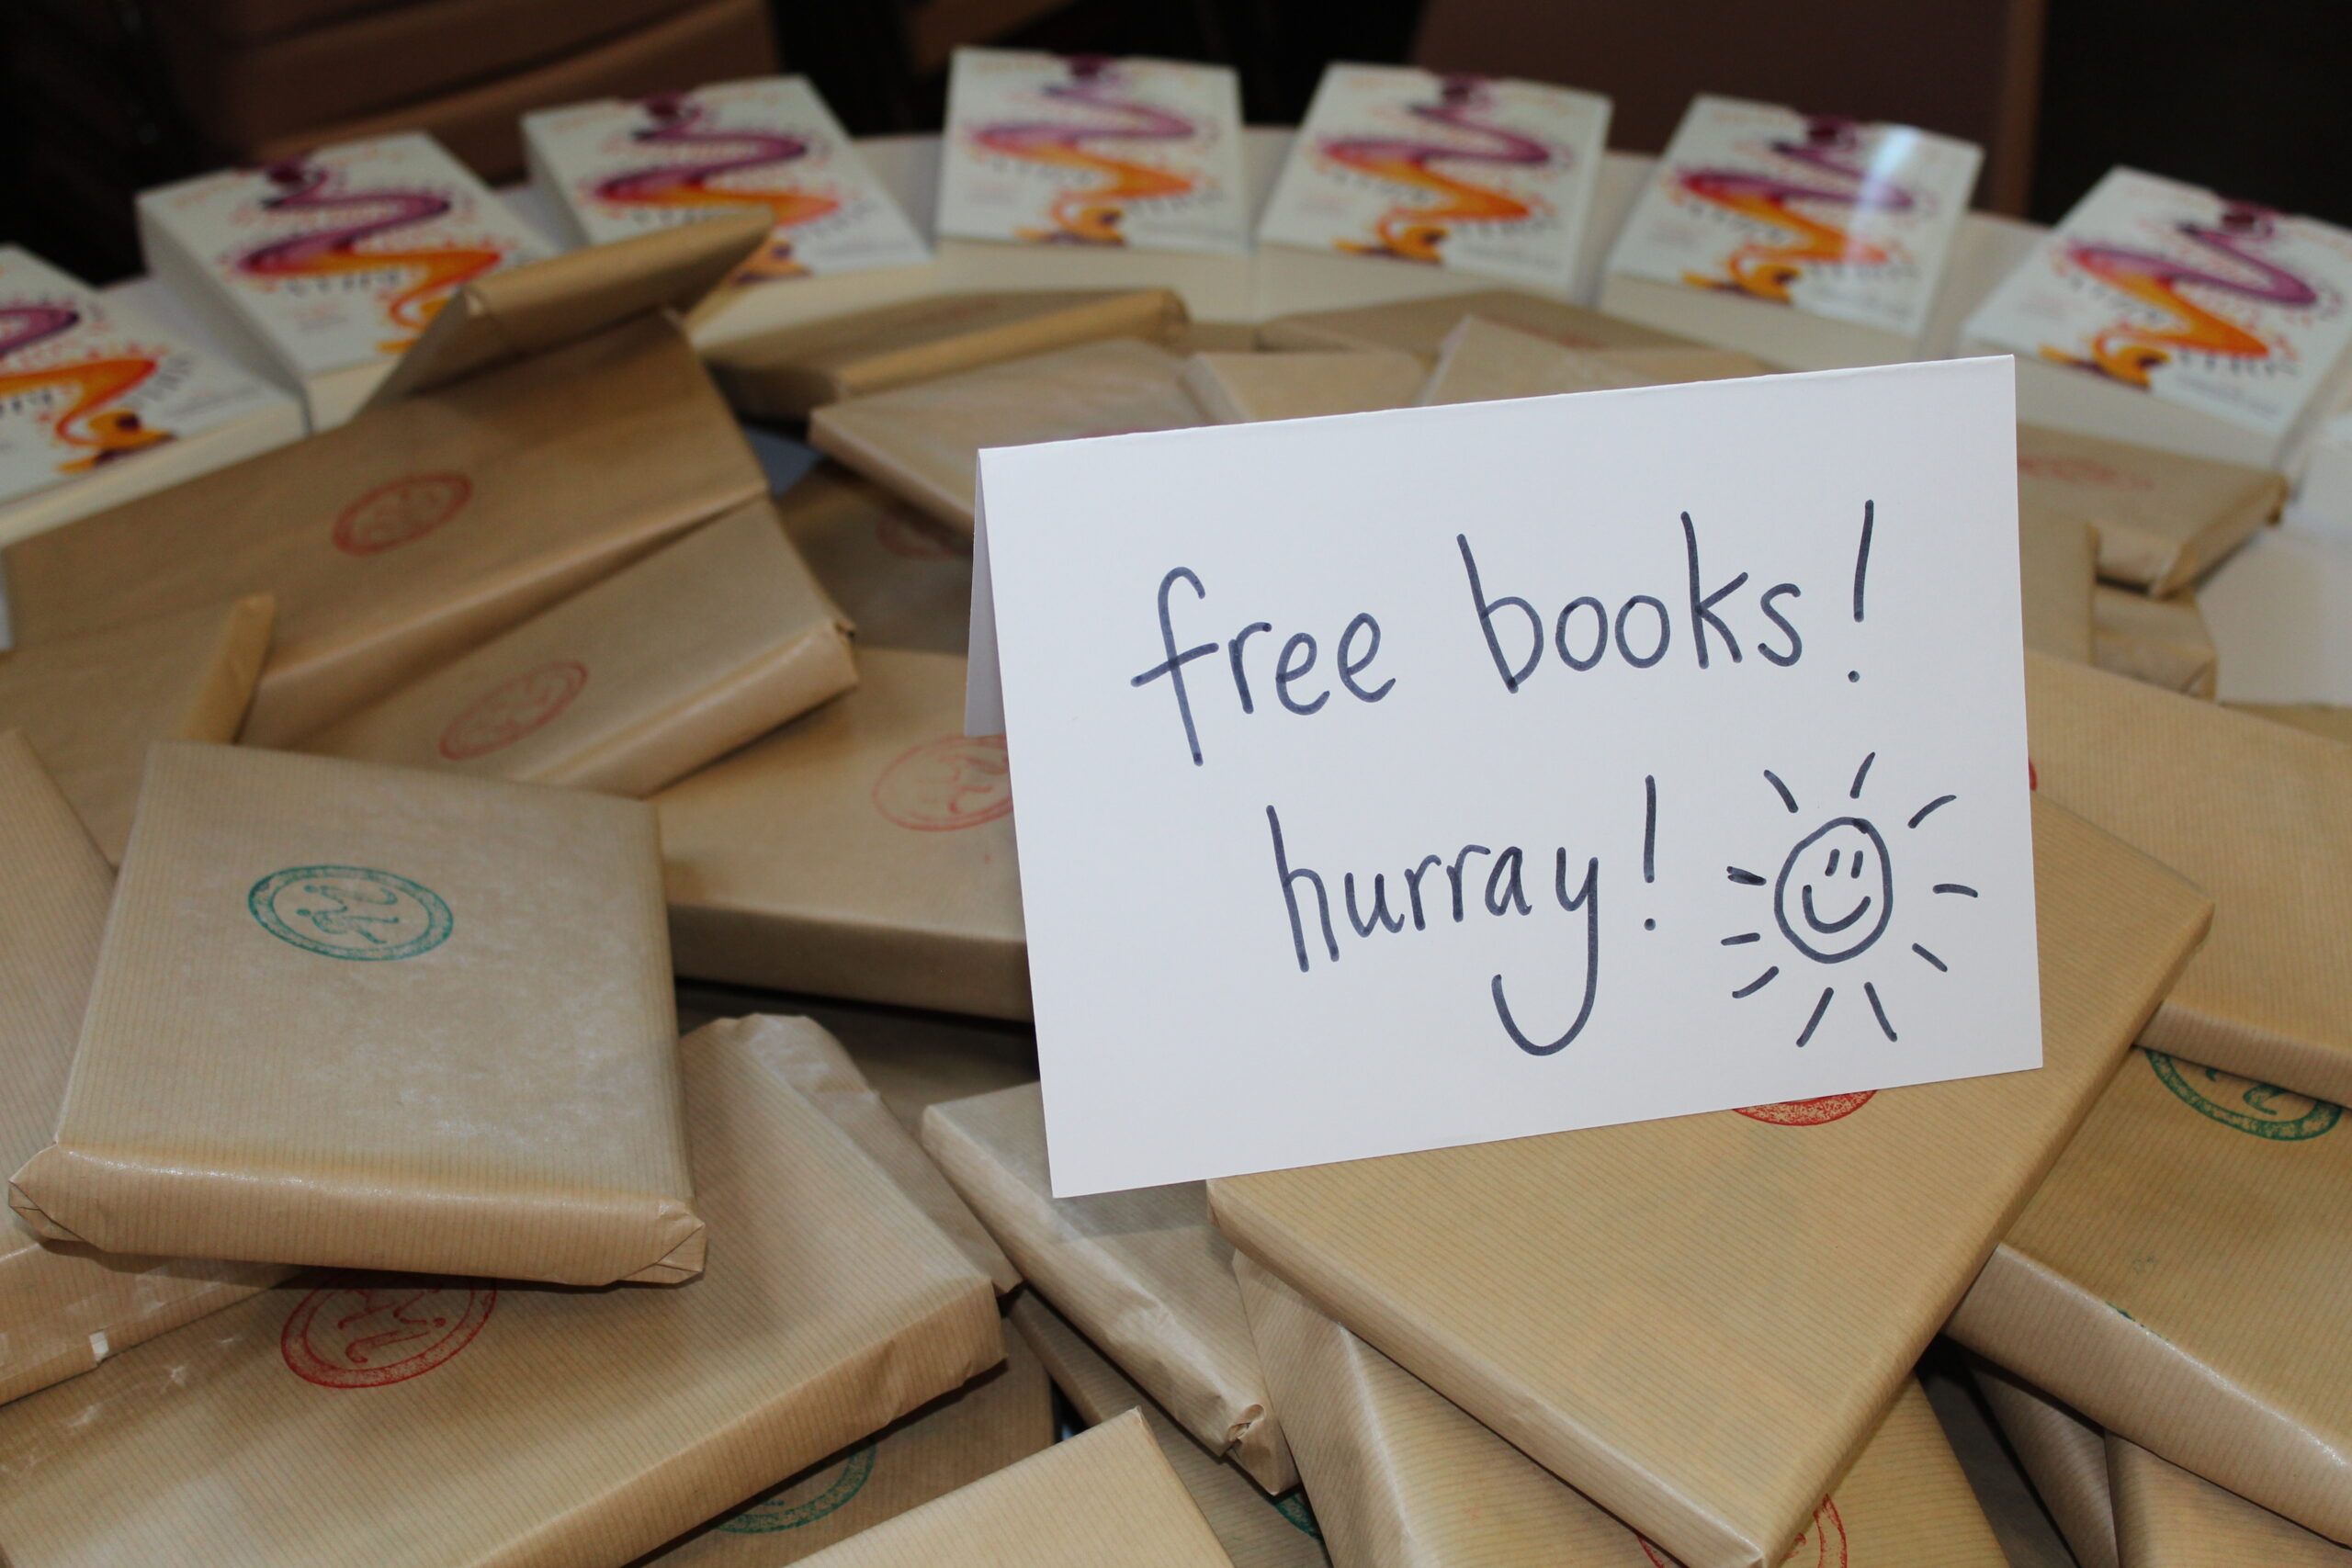 A big pile of books wrapped in brown paper with a handwritten label that says 'free books! hurray!' and has a line drawing of a smiling sun on it.